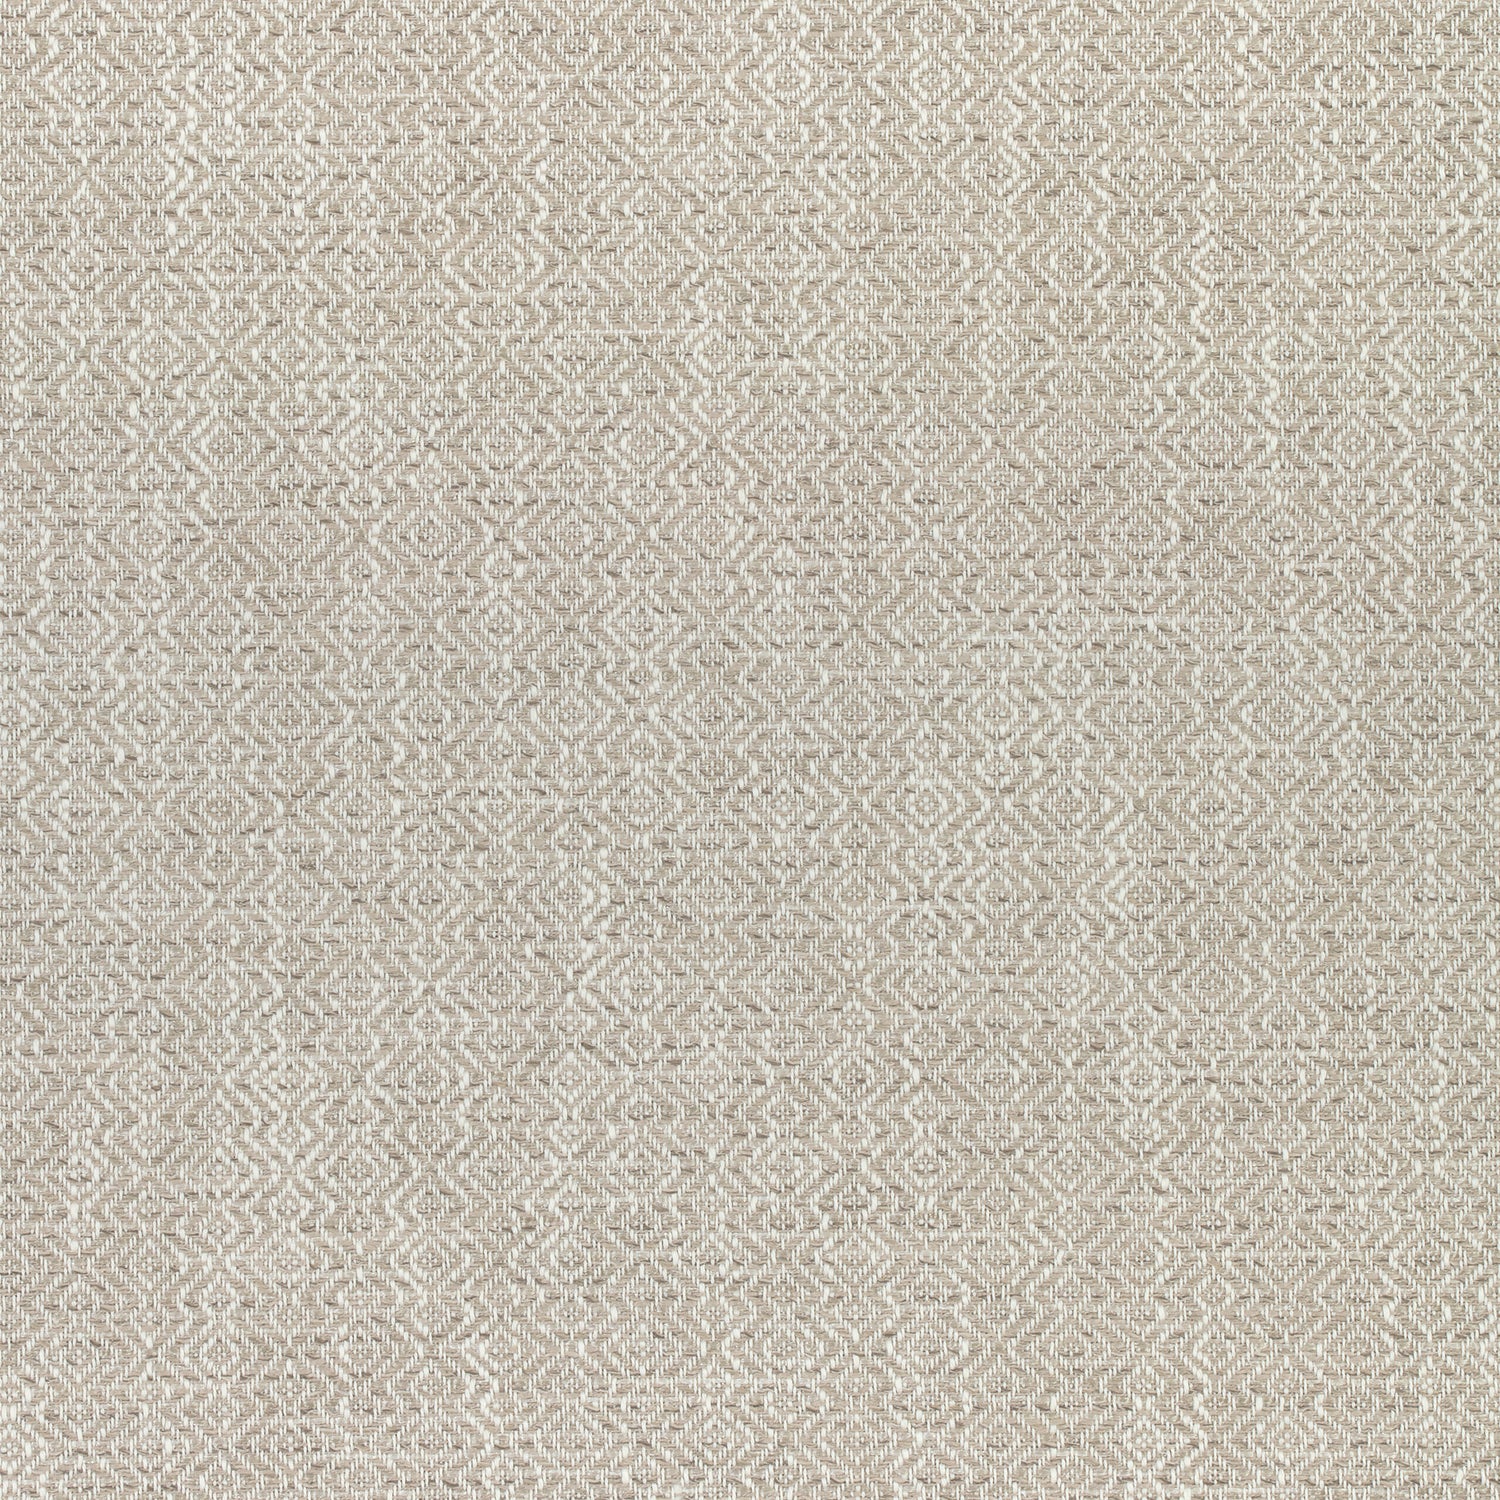 Kingsley fabric in linen color - pattern number W74064 - by Thibaut in the Cadence collection